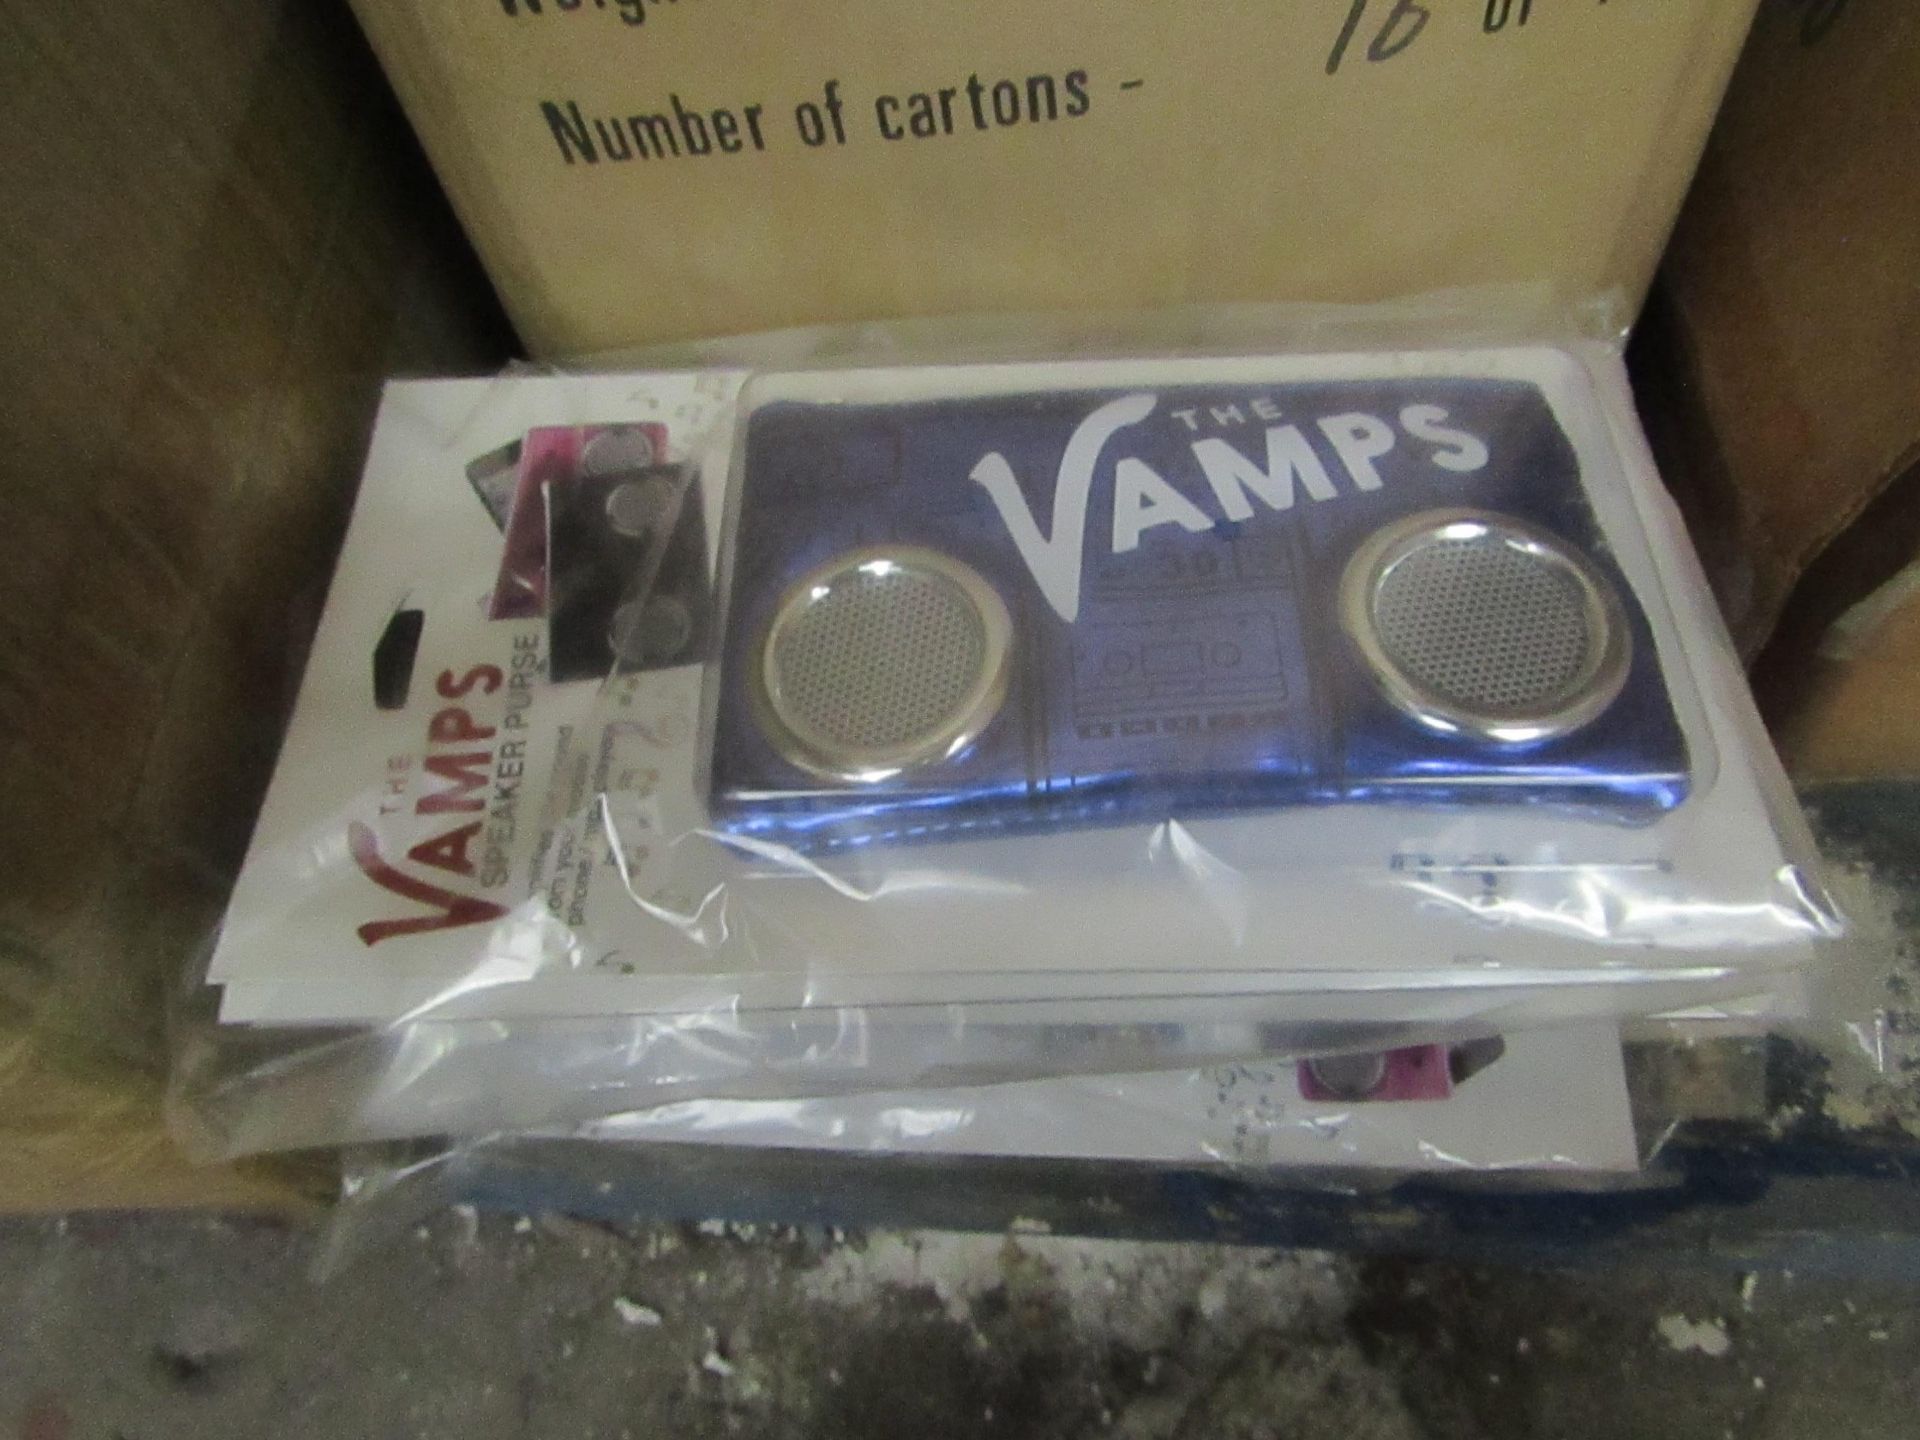 The Vamps Purses with Built in speakers, new and packaged.